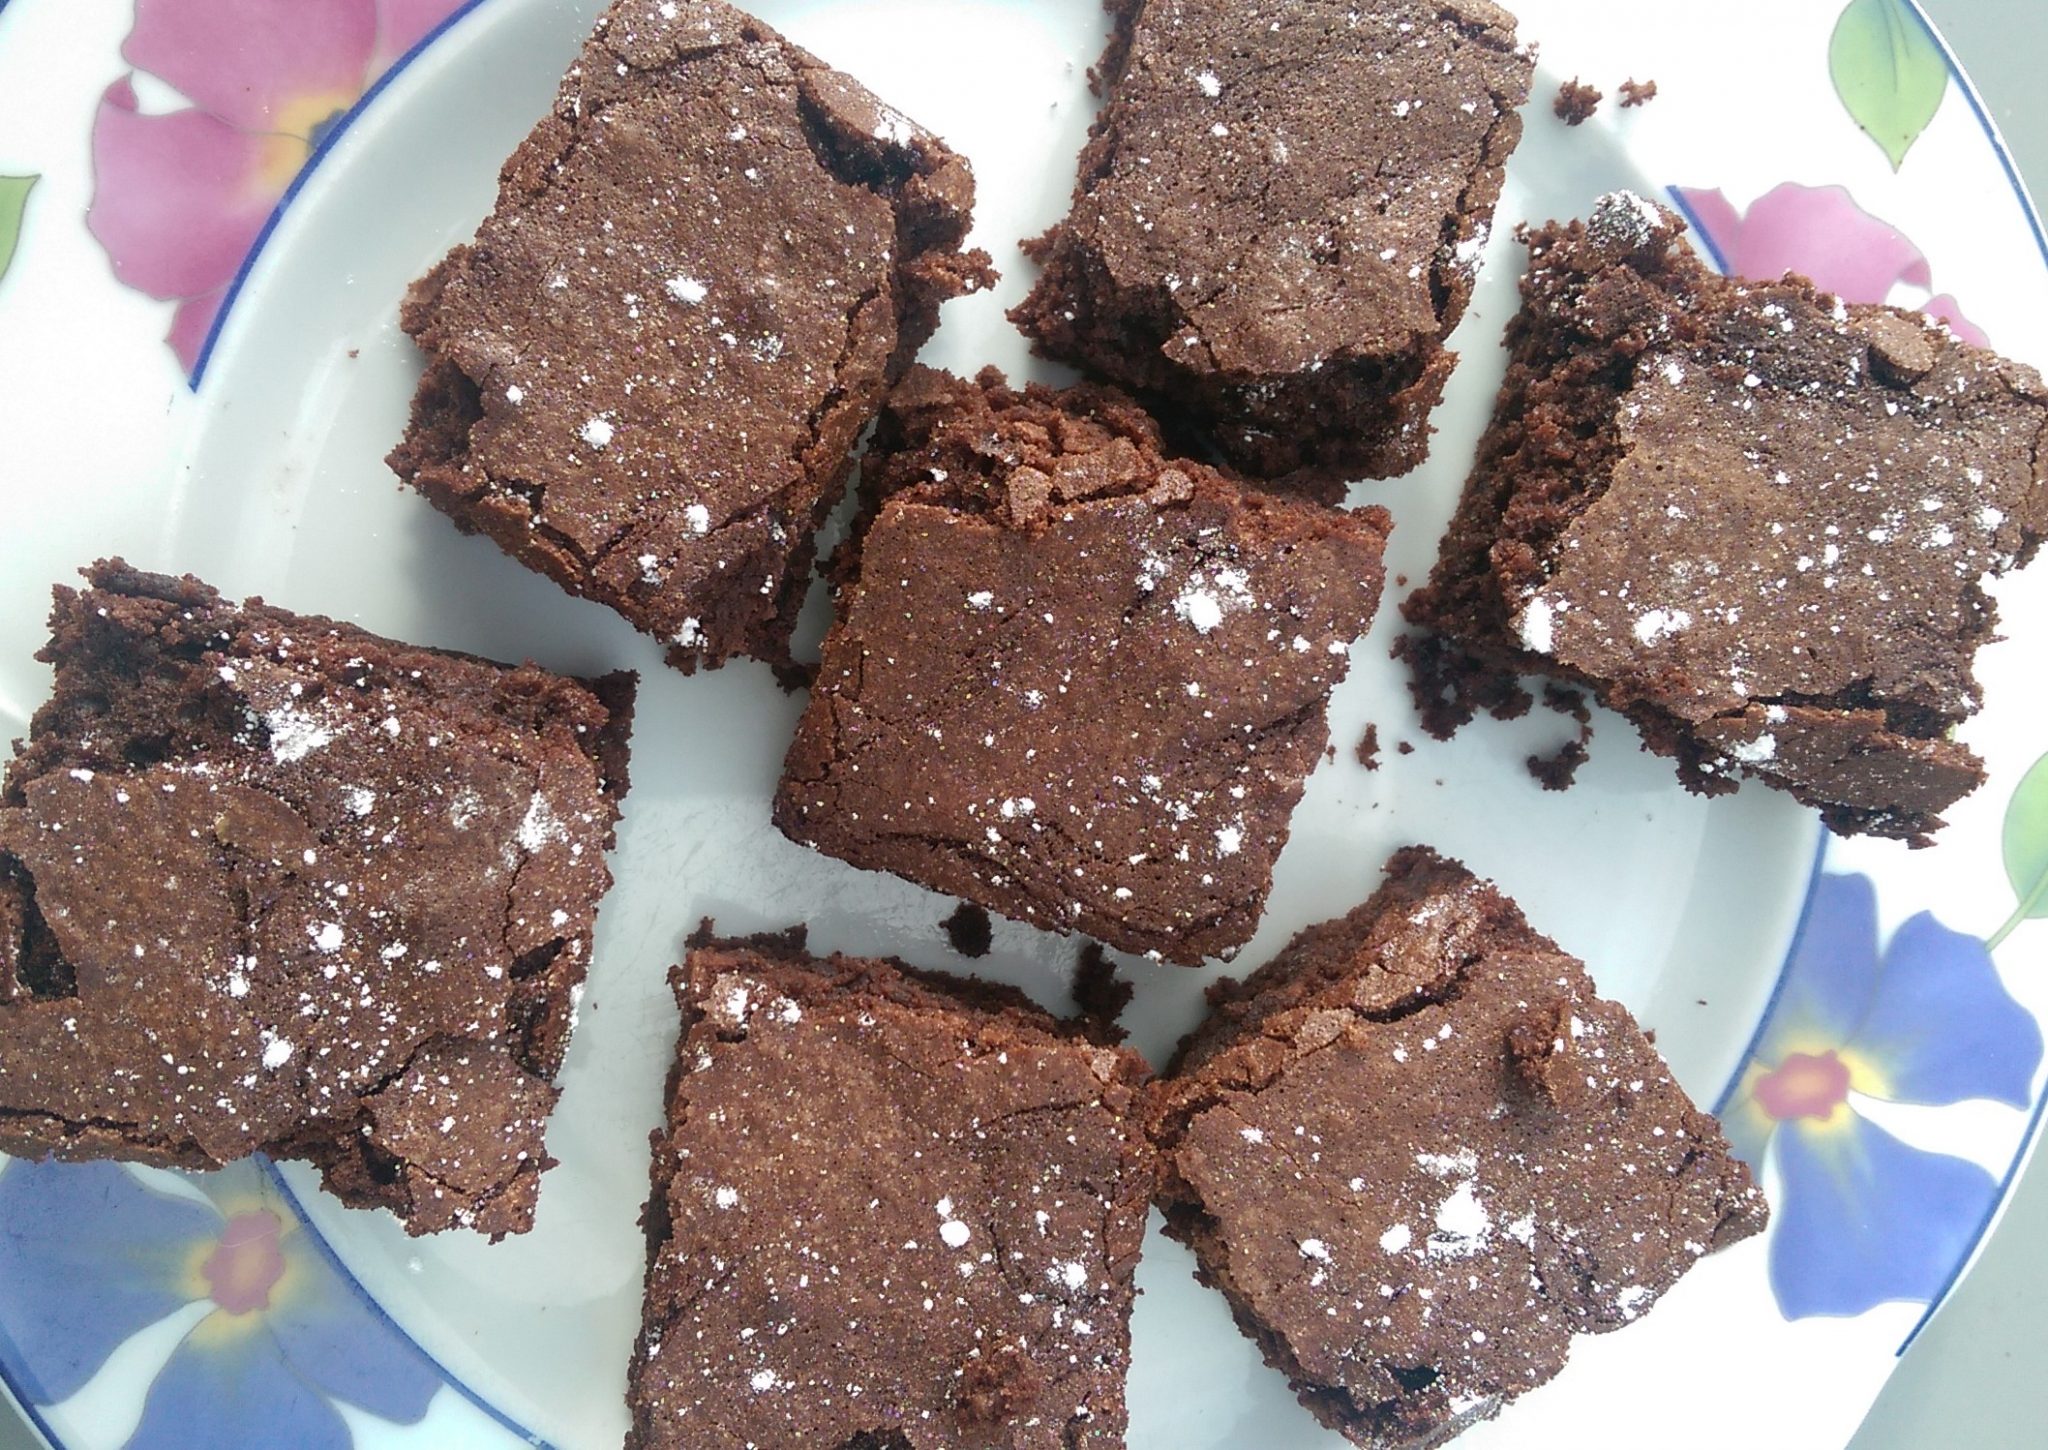 Delicious Chocolate Brownies